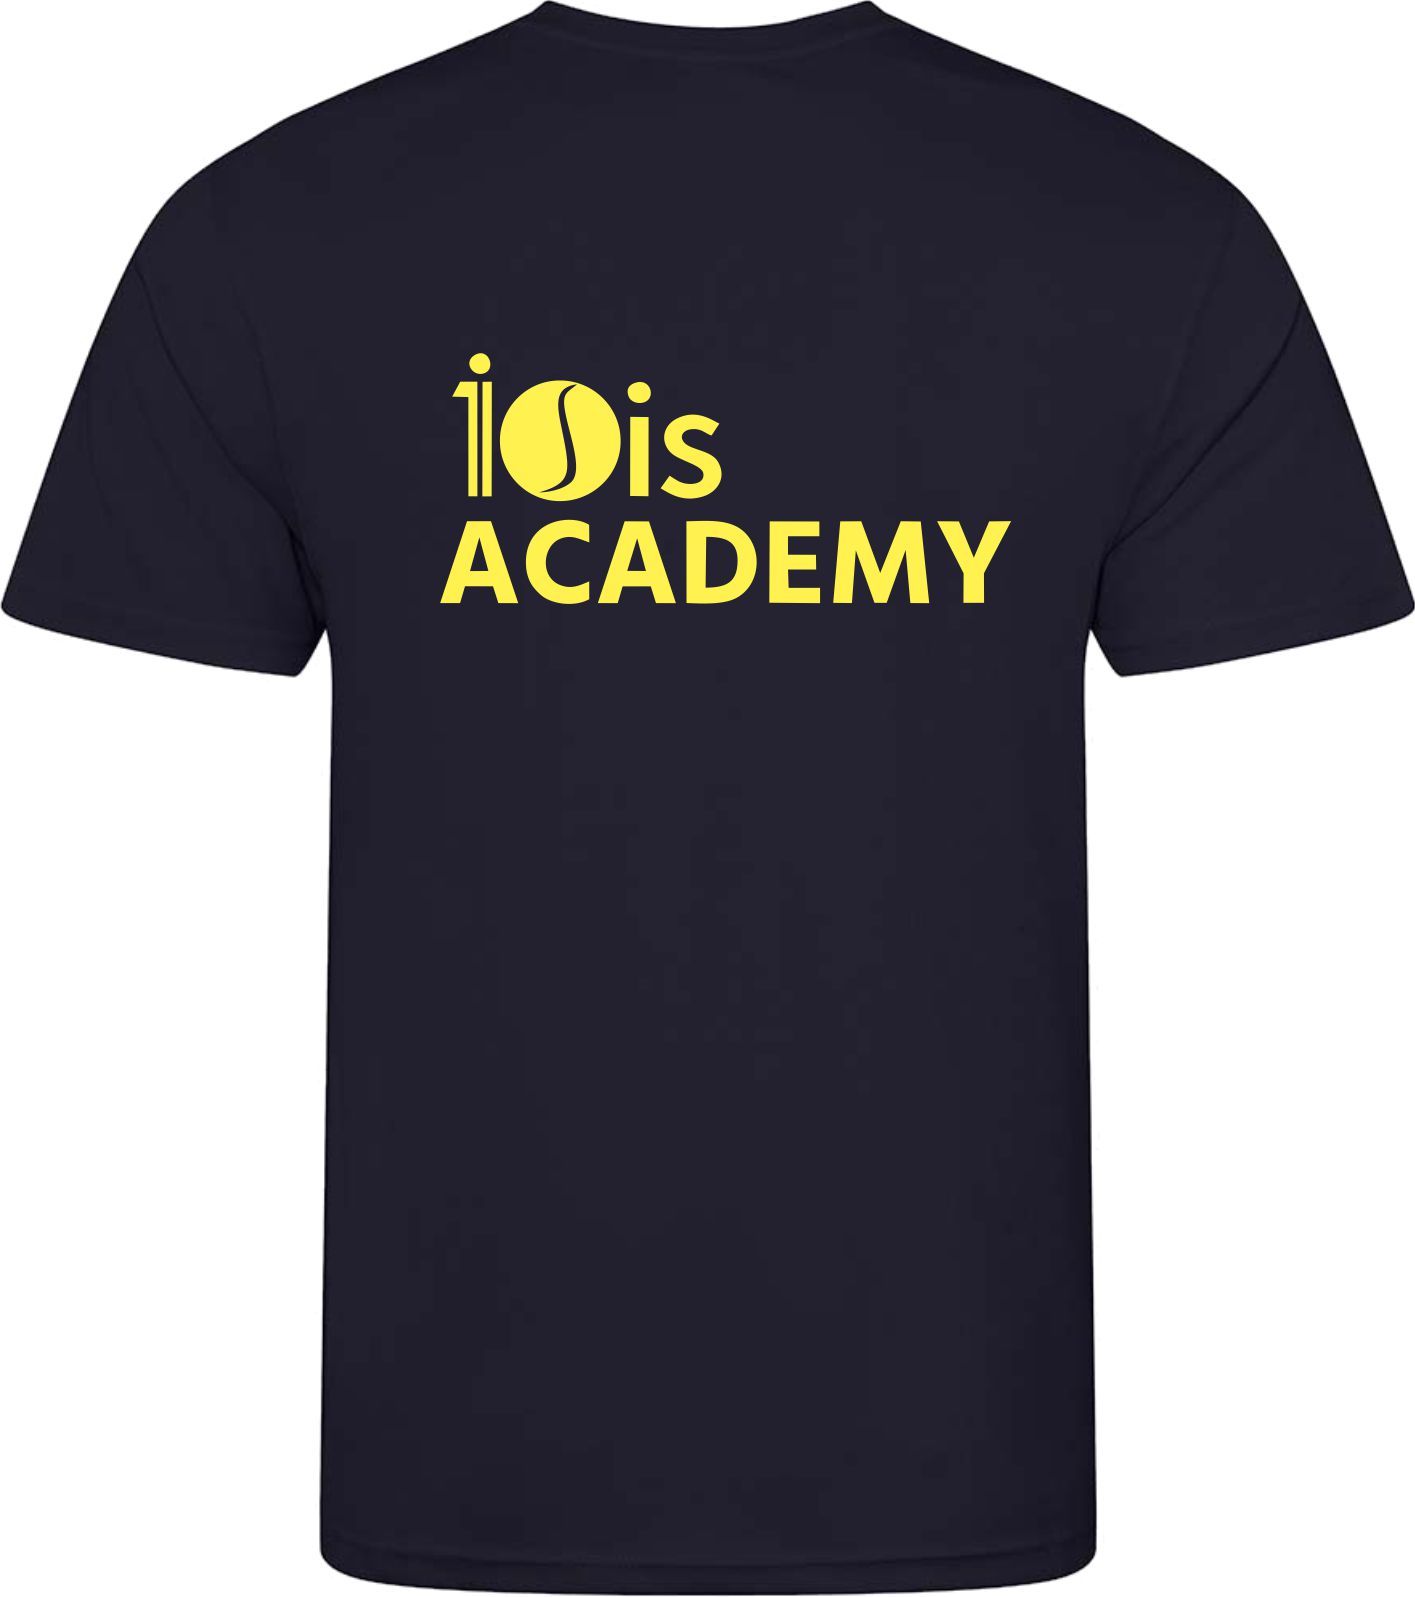 10is Academy Short Sleeve Cool T (Kids)